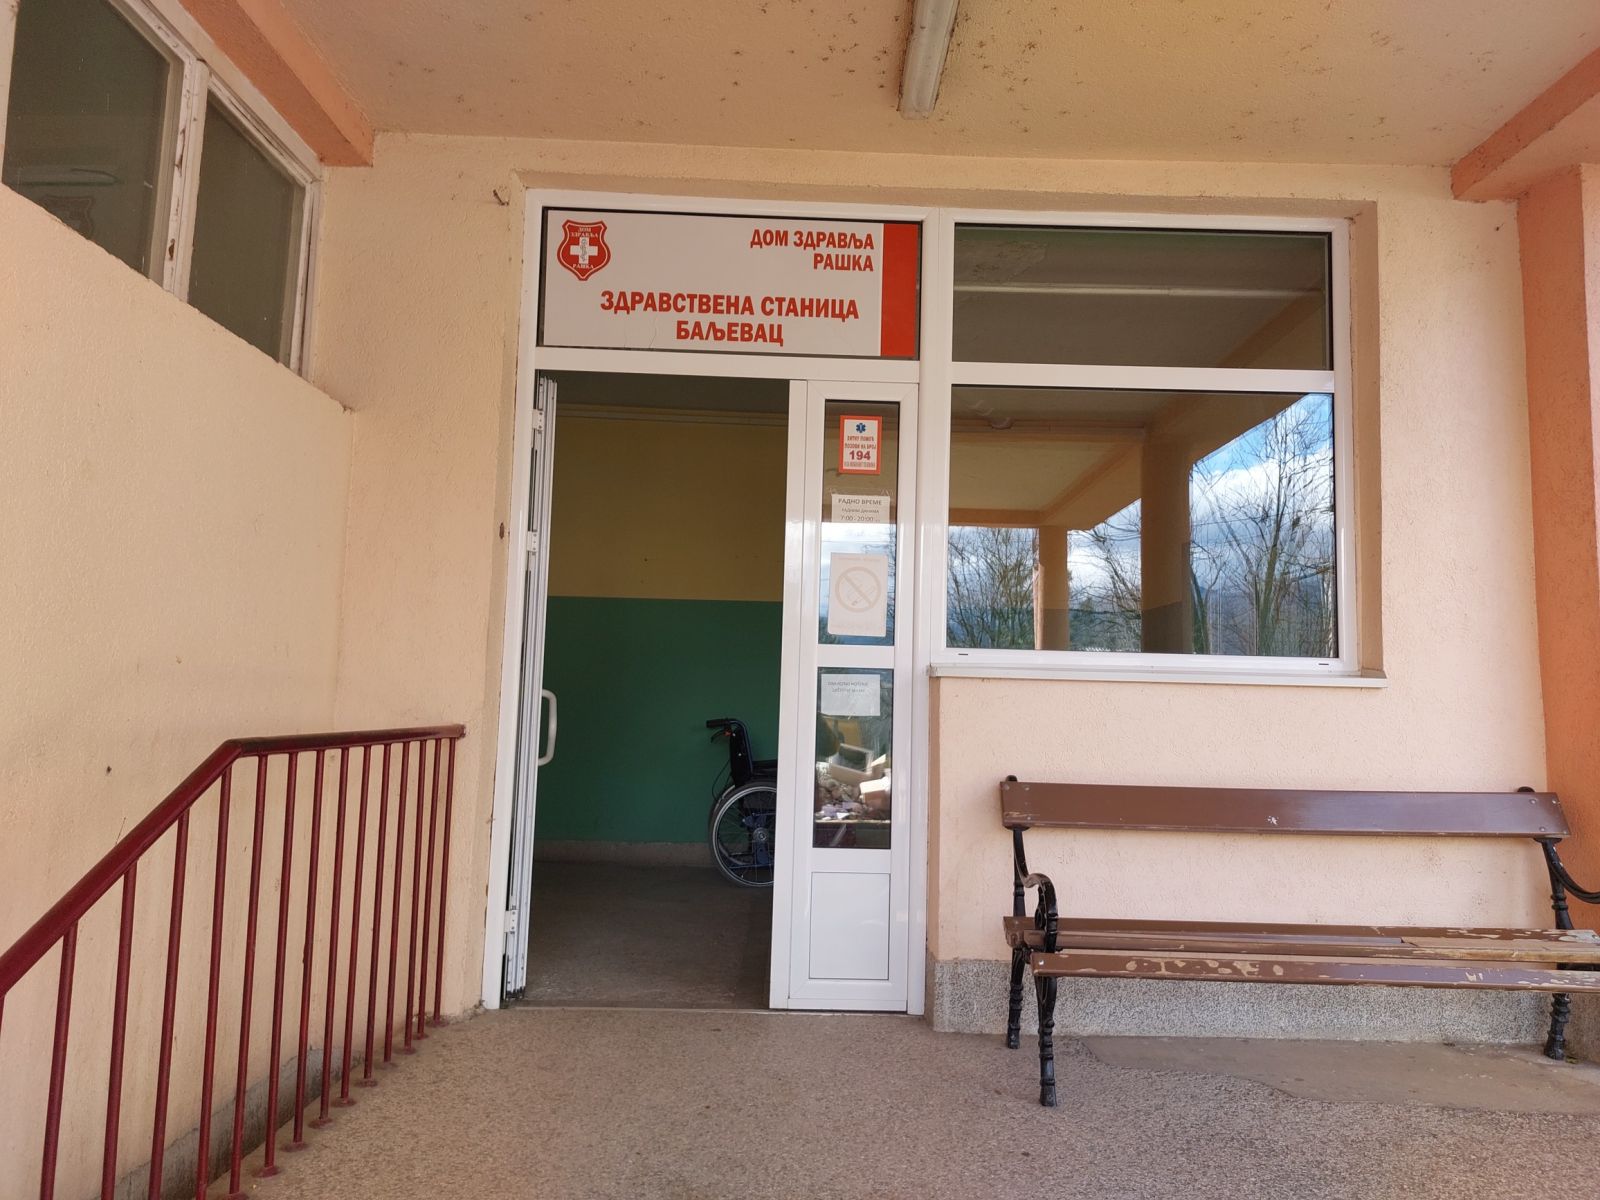 Improvement of health services in the municipality of Raška thanks to the EU support